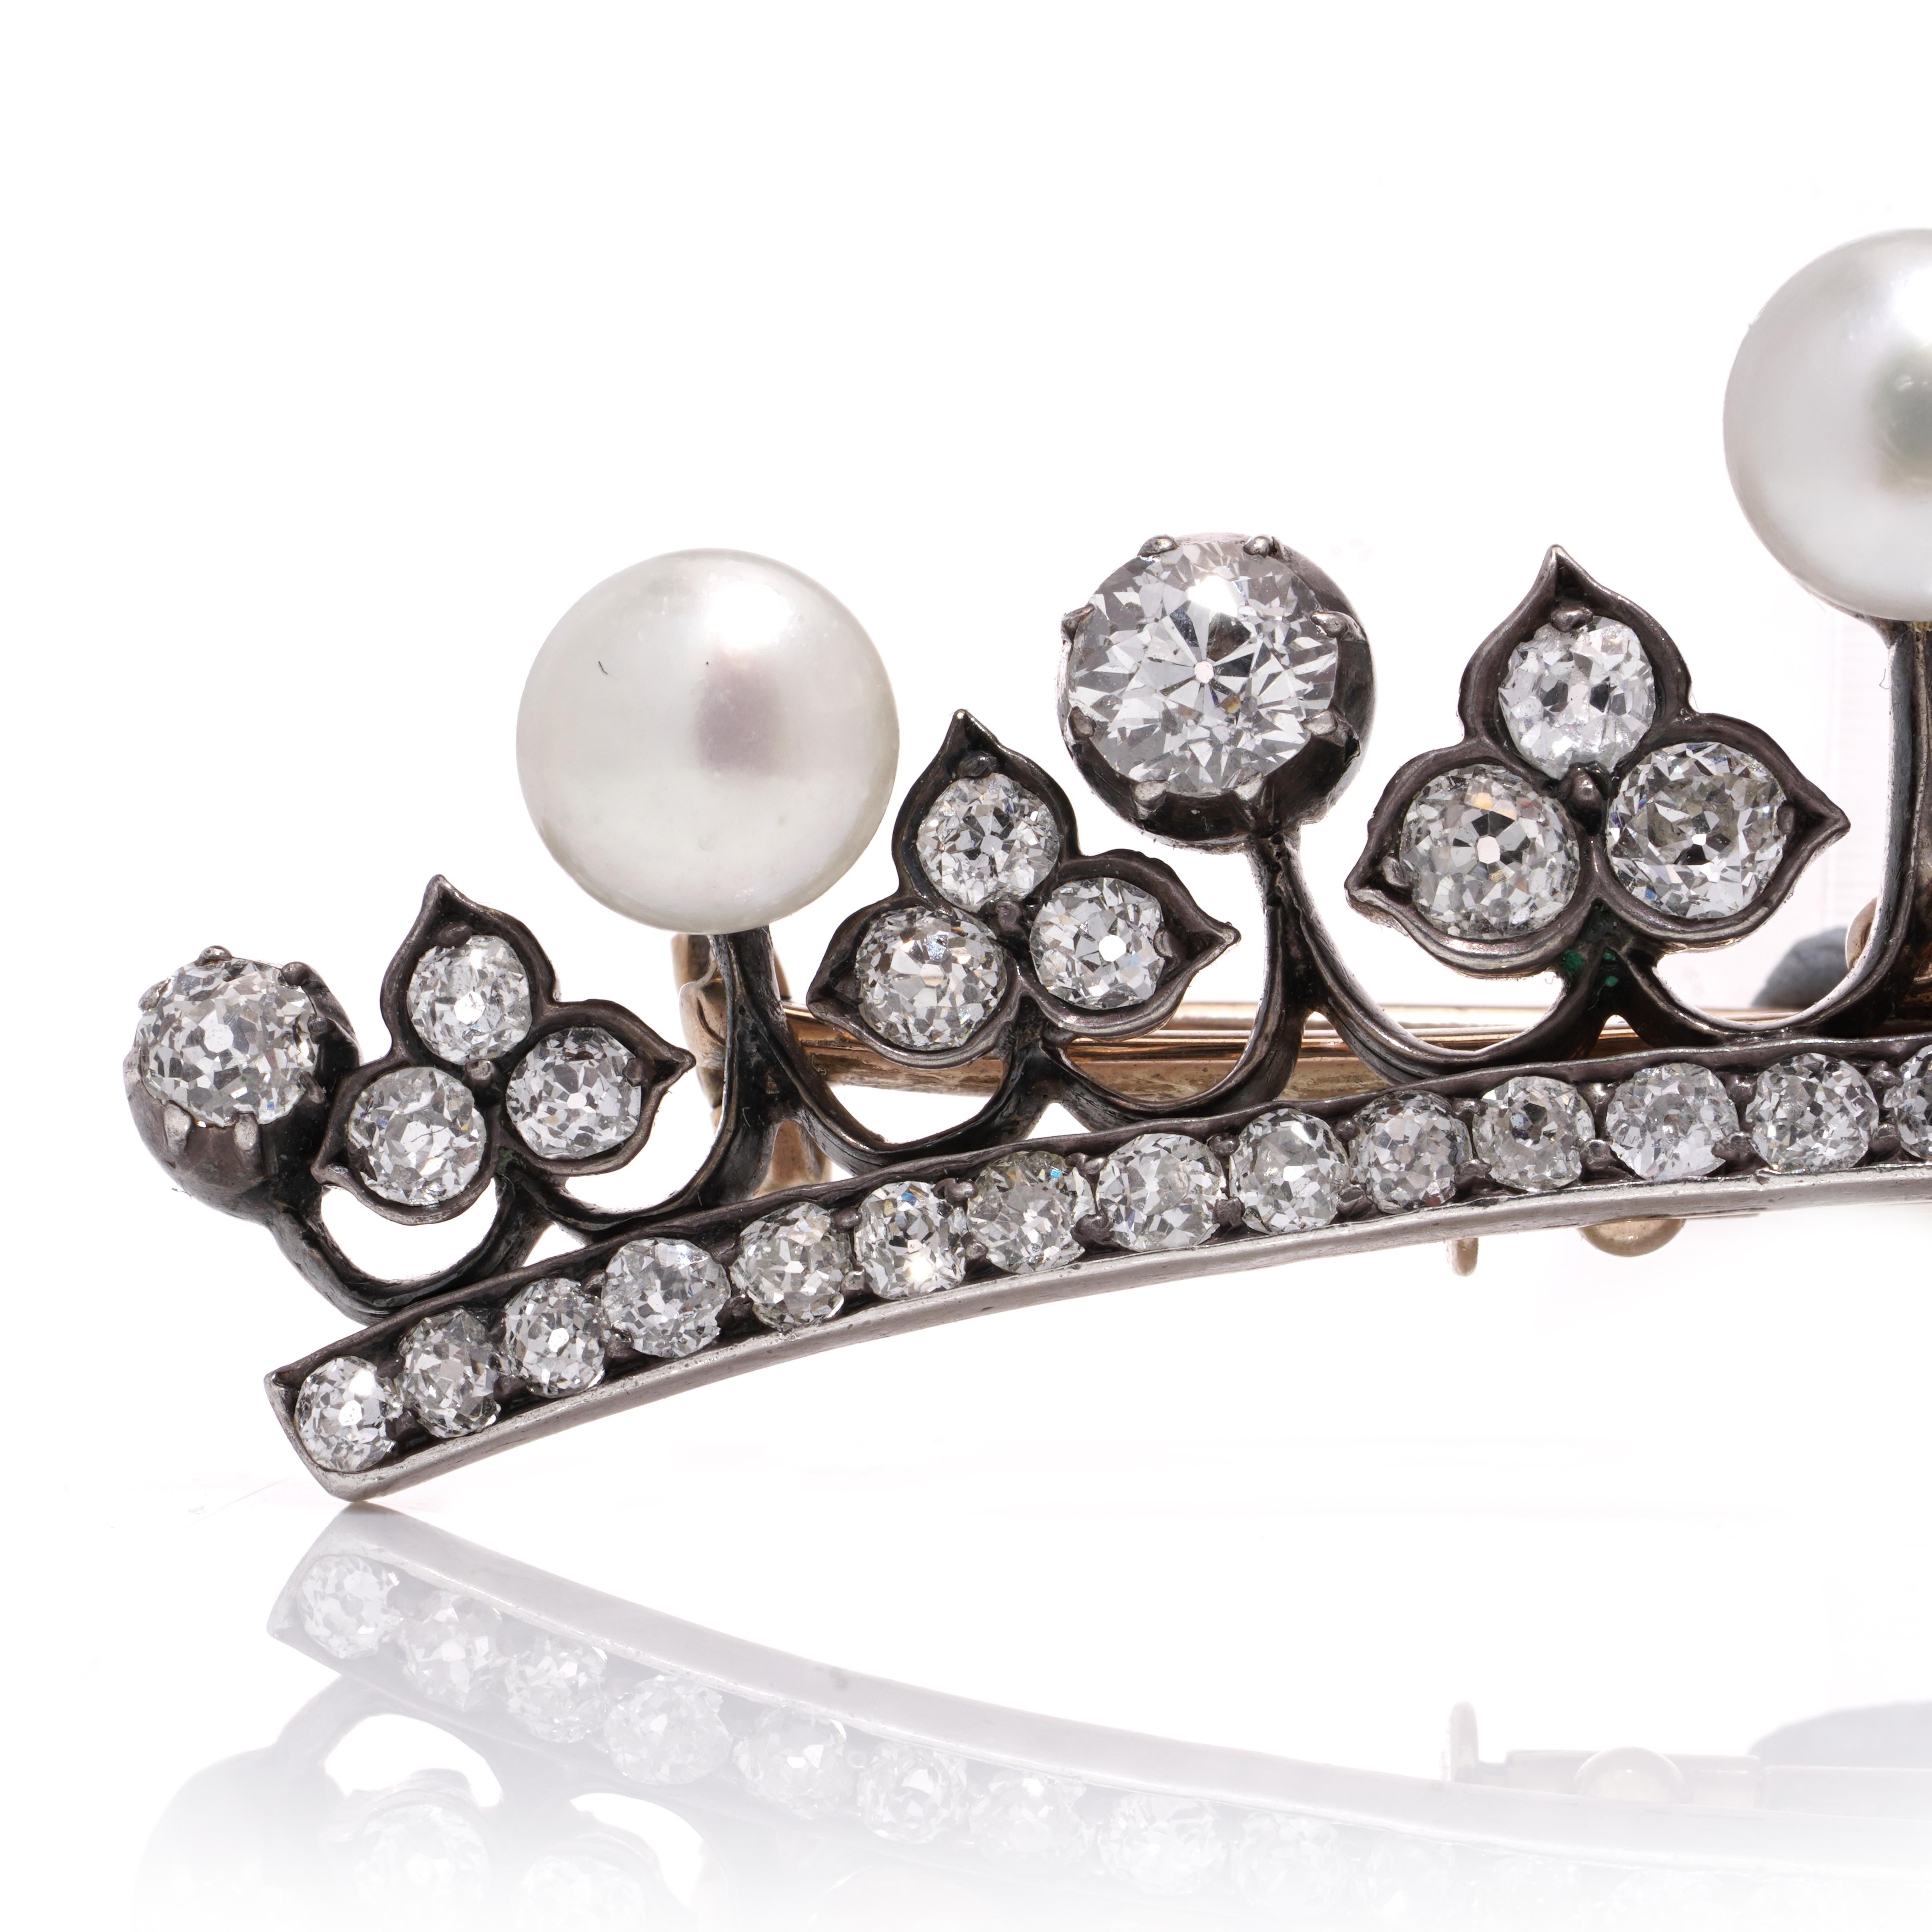 Antique Victorian 15kt rose gold and silver old-European cut diamond and pearl tiara brooch with safety pin chain. 
X-Ray has been tested positive for 15kt gold and silver.  
Made in England, Circa 1870's 

The dimensions -
Size: length x width x